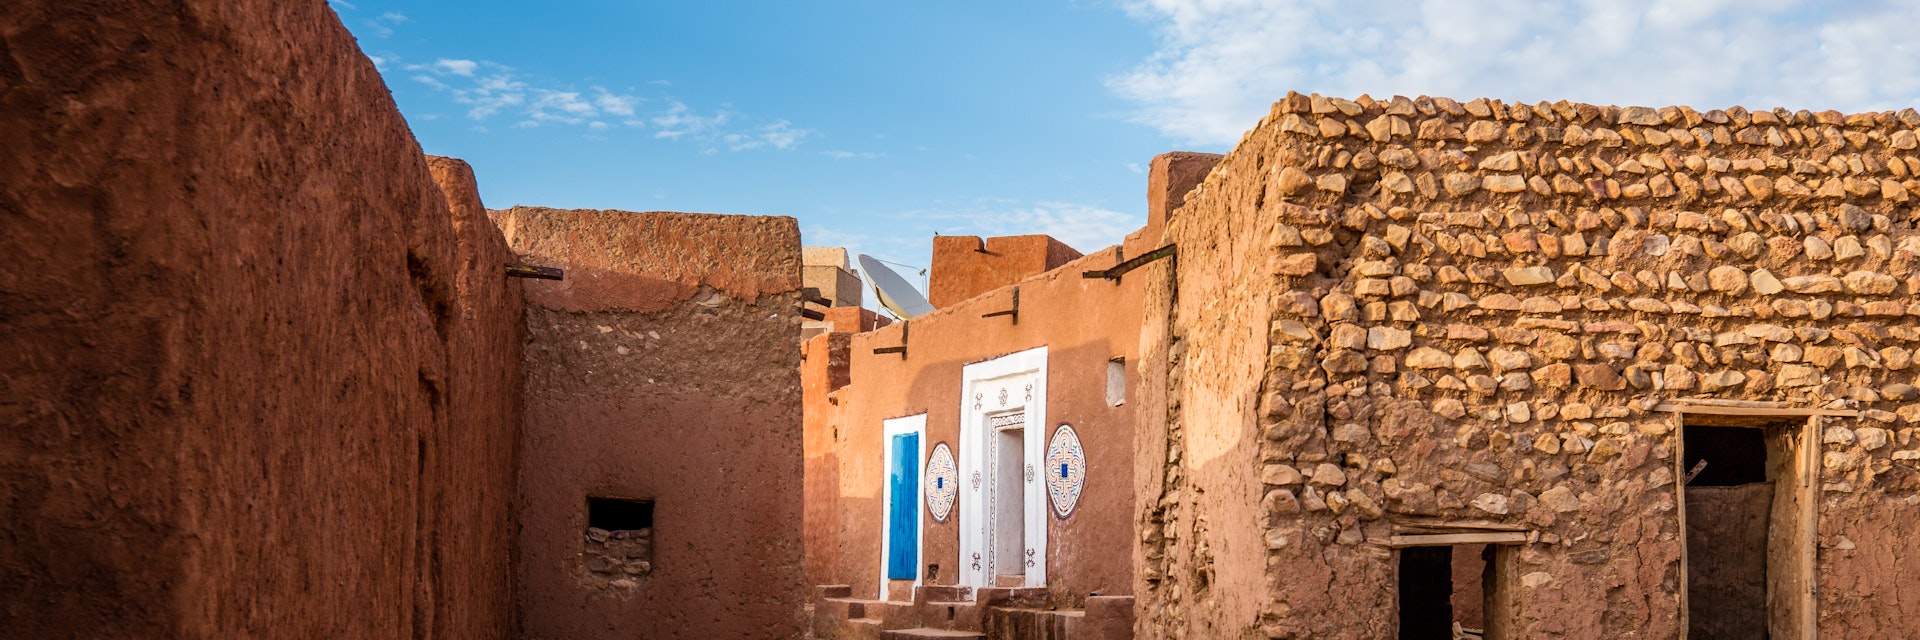 Famous ancient arabic door paintings at medieval bricked house in World Heritage Site Walata, Mauritania; Shutterstock ID 1096636094; your: Erin Lenczycki; gl: 65050; netsuite: Online Editorial; full: Destination